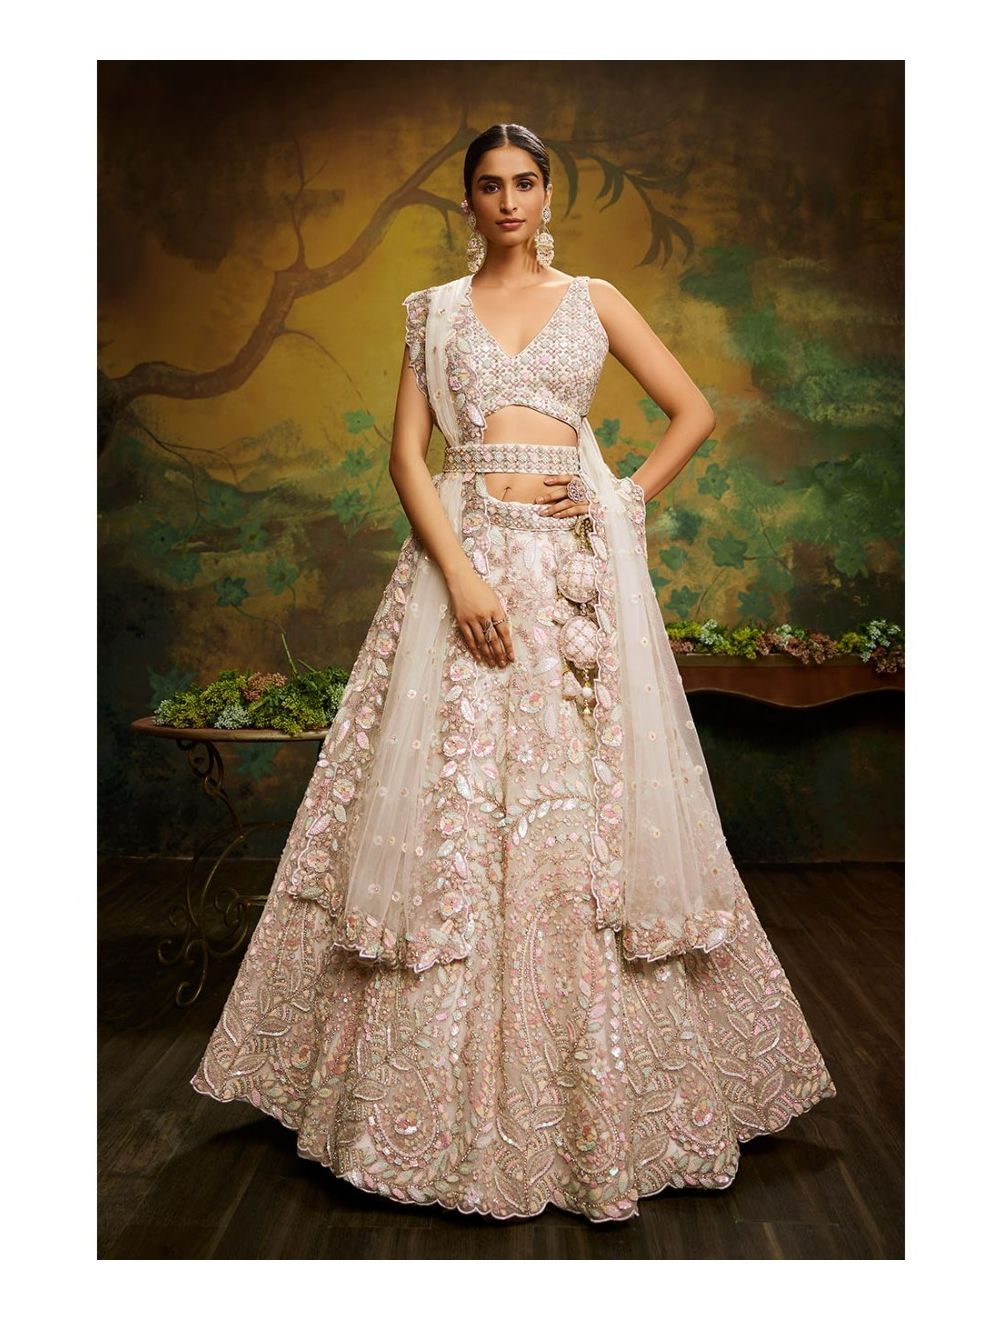 Reveal more than 165 lehenga for wedding party super hot